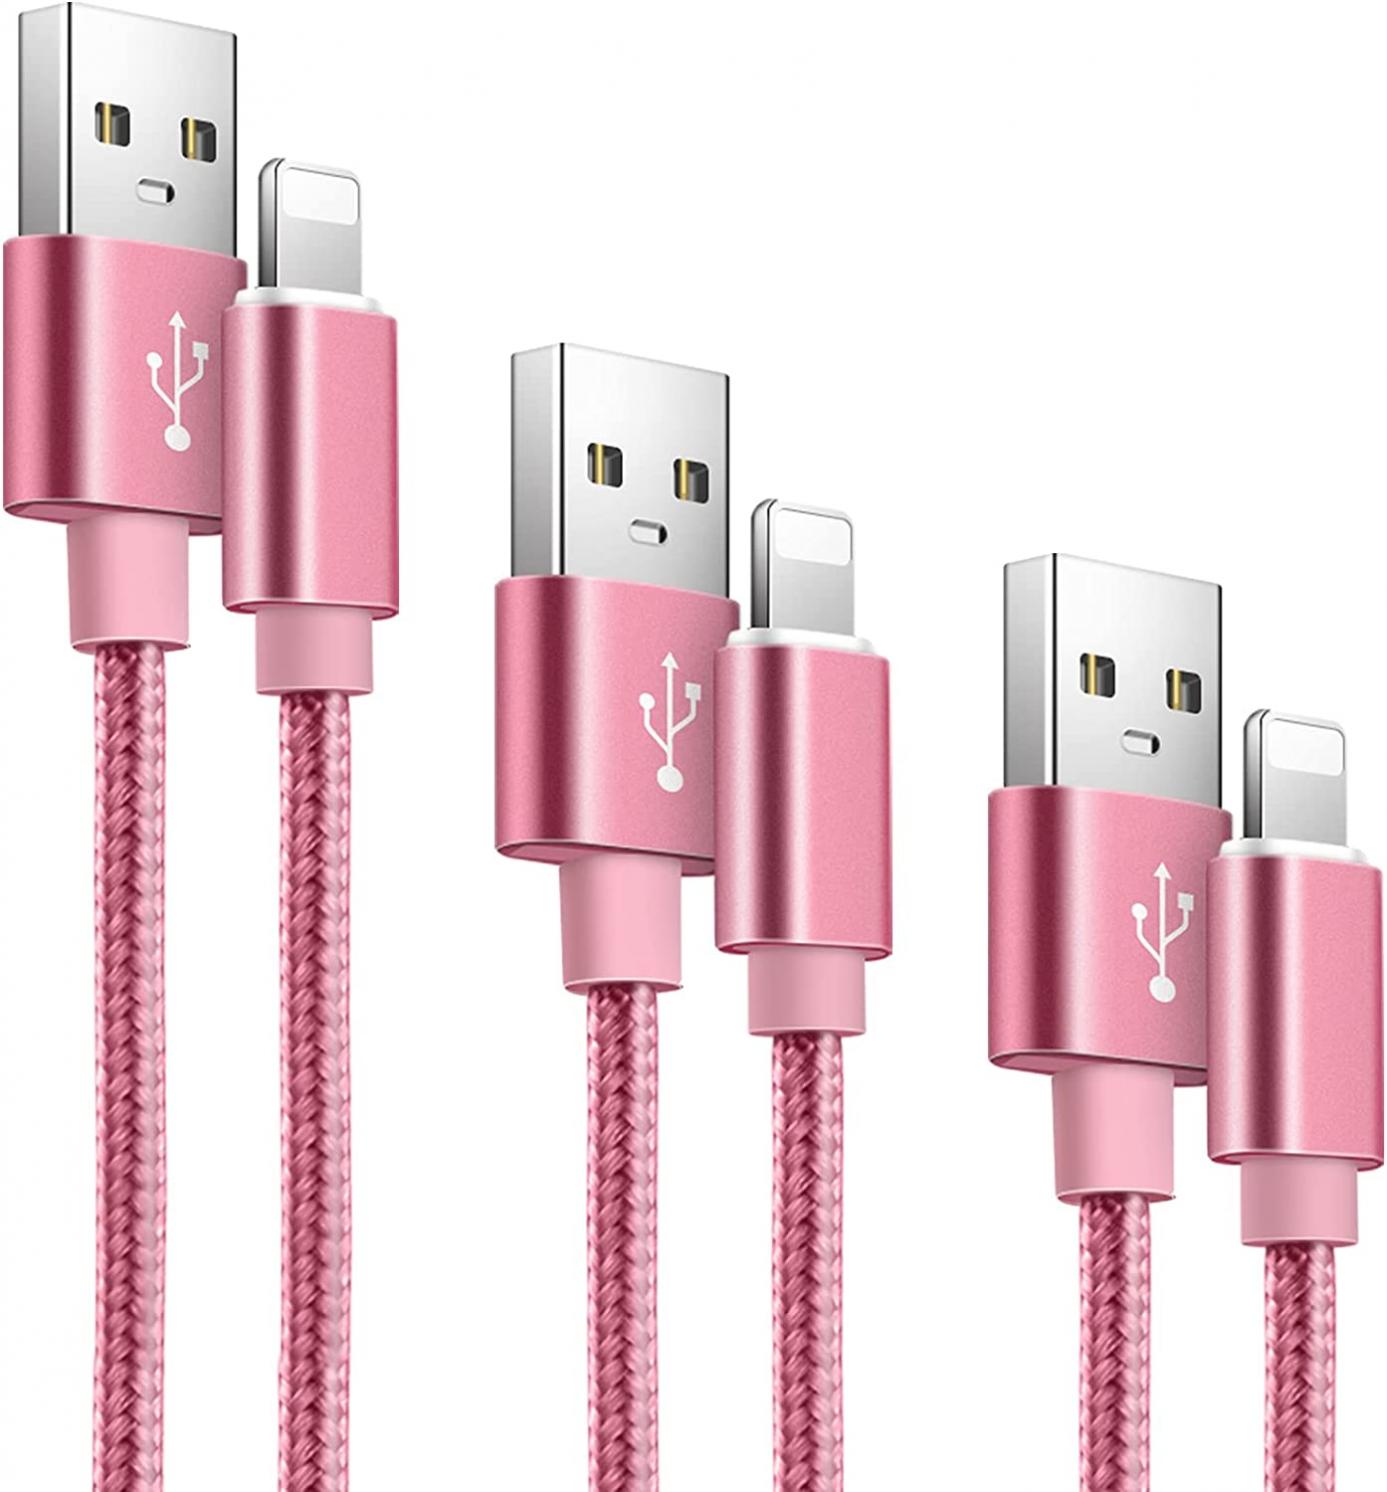 [Apple MFi Certified] iPhone Charger 3 Pack 10ft 6ft 3ft iPhone Charging Cables Nylon Braided Long USB Cable iPhone Charger Cord Compatible with iPhone 12 Pro Max 11 10 Xr Xs Max 8 7 6 5 SE - Pink